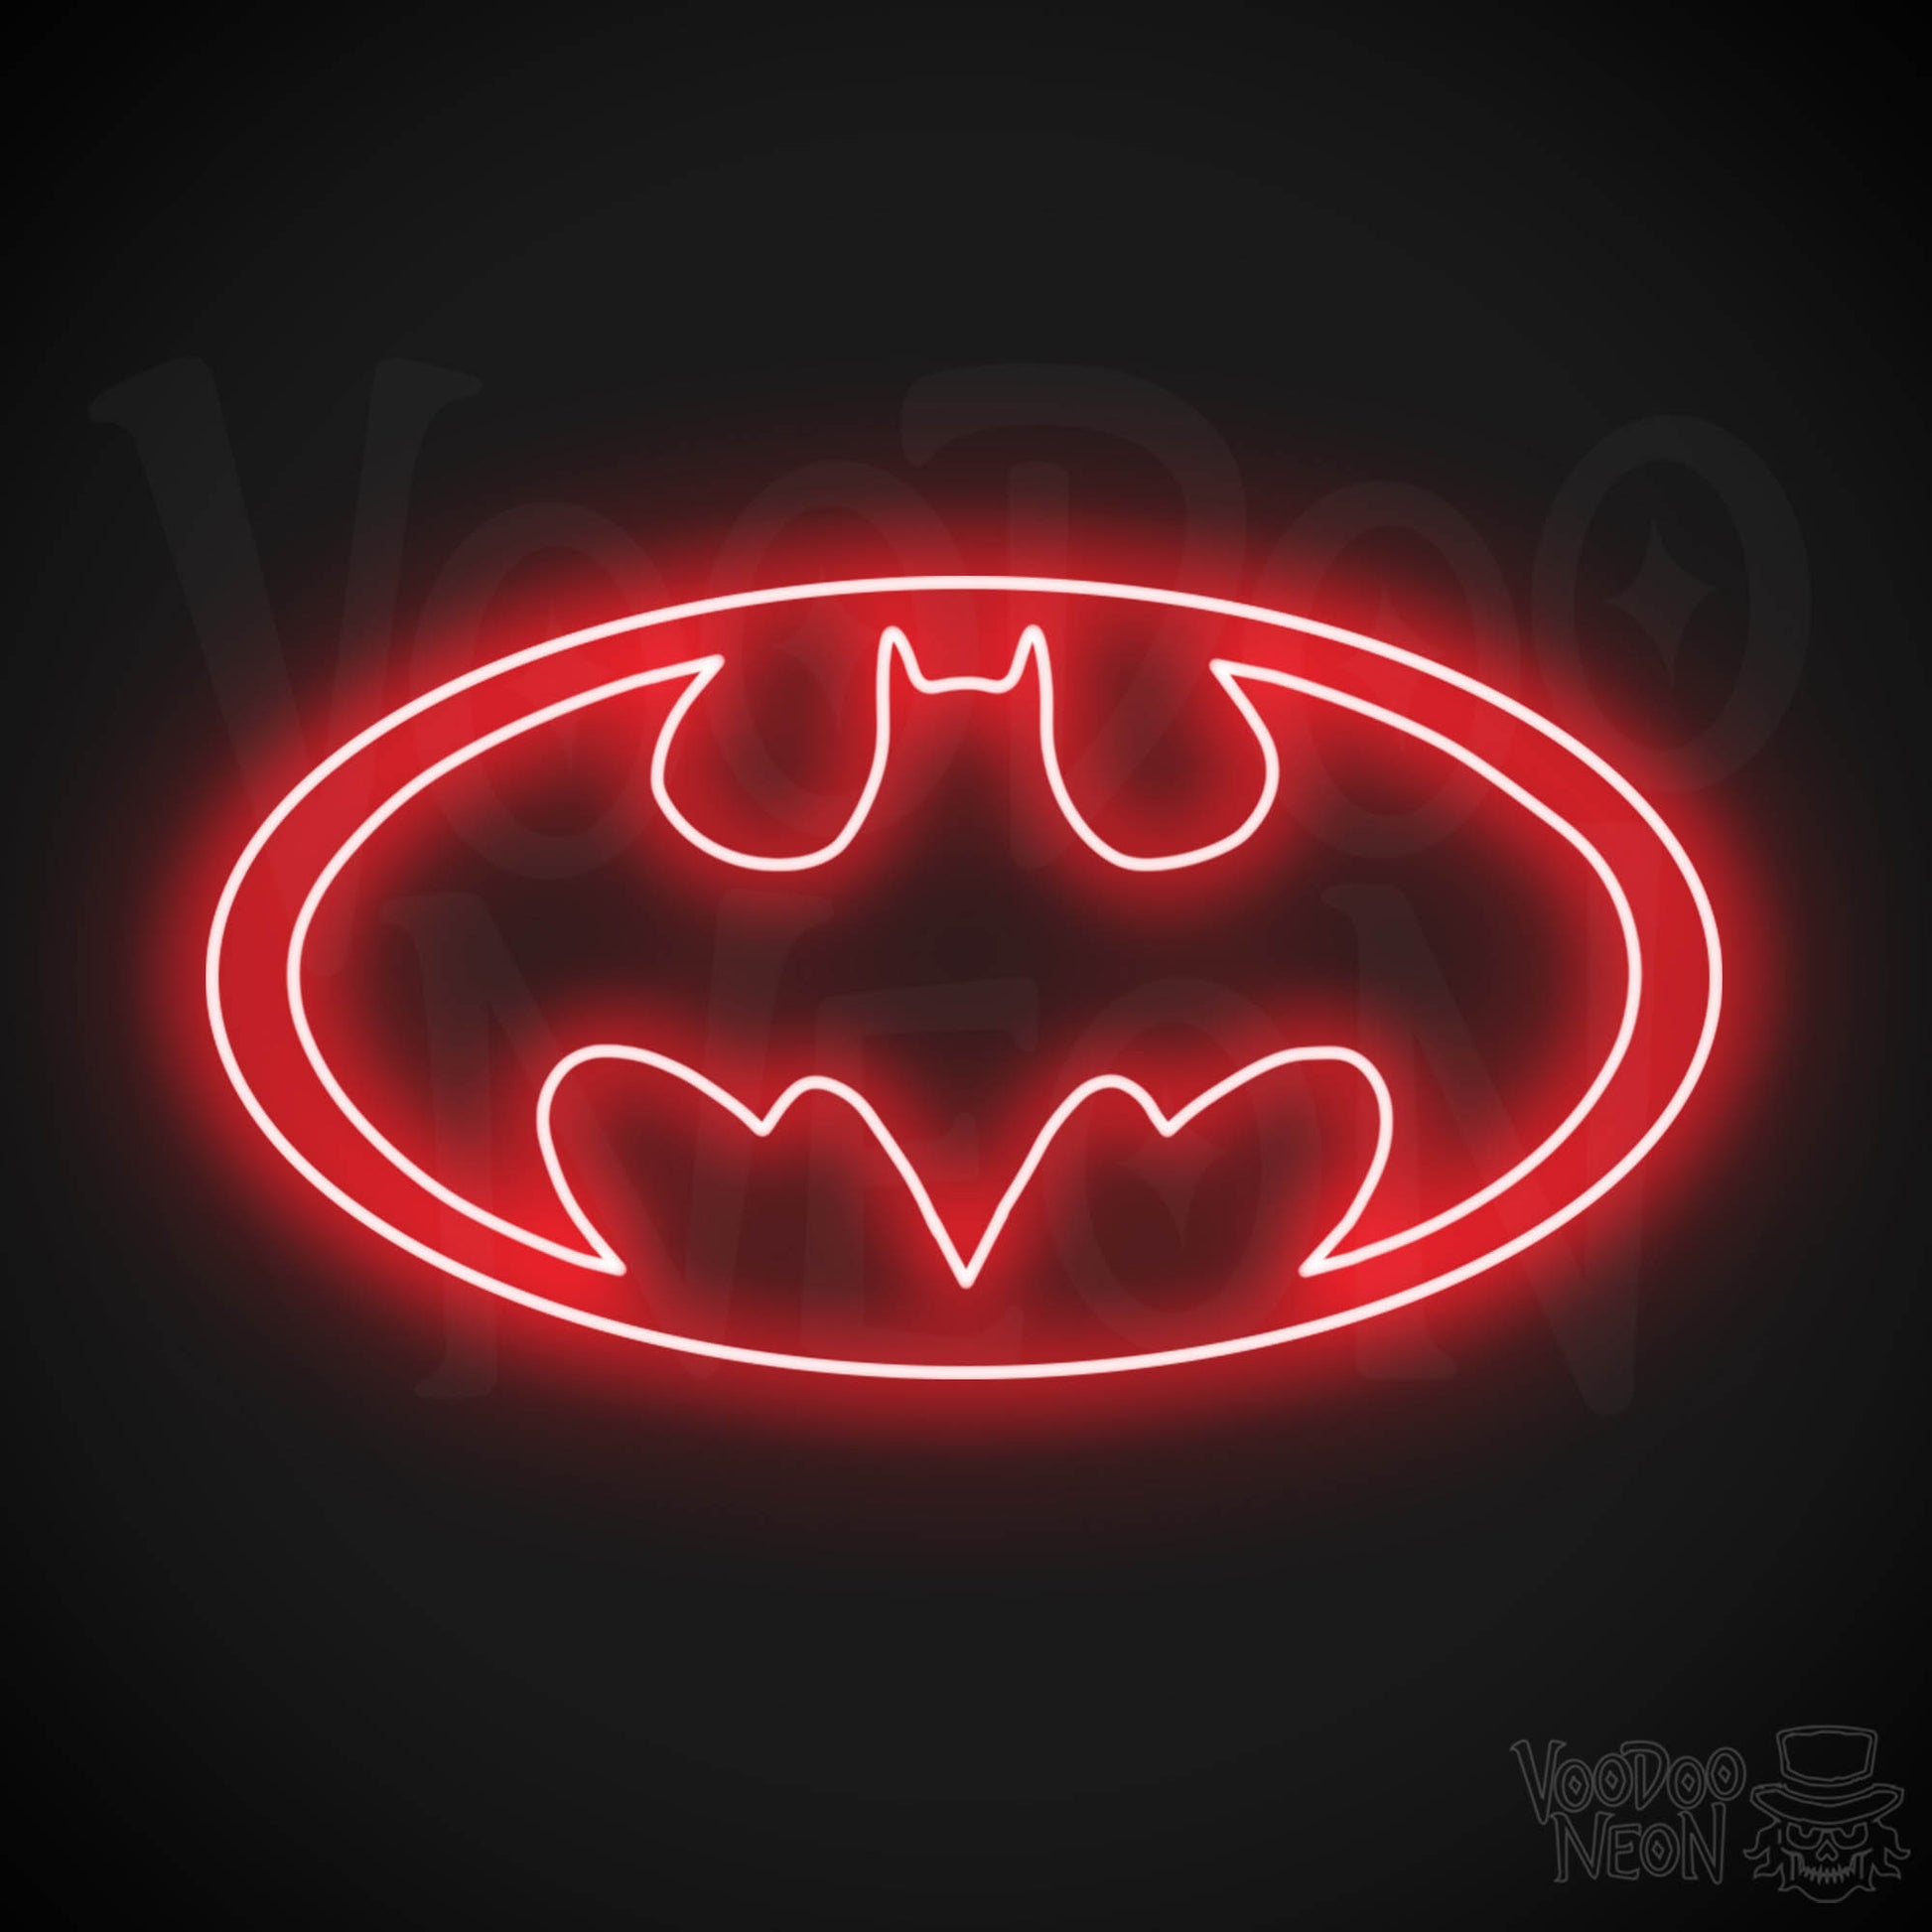 Batman Neon Sign - Batman Sign - Batman Light - Batman Symbol Wall Art - LED Sign - Color Red